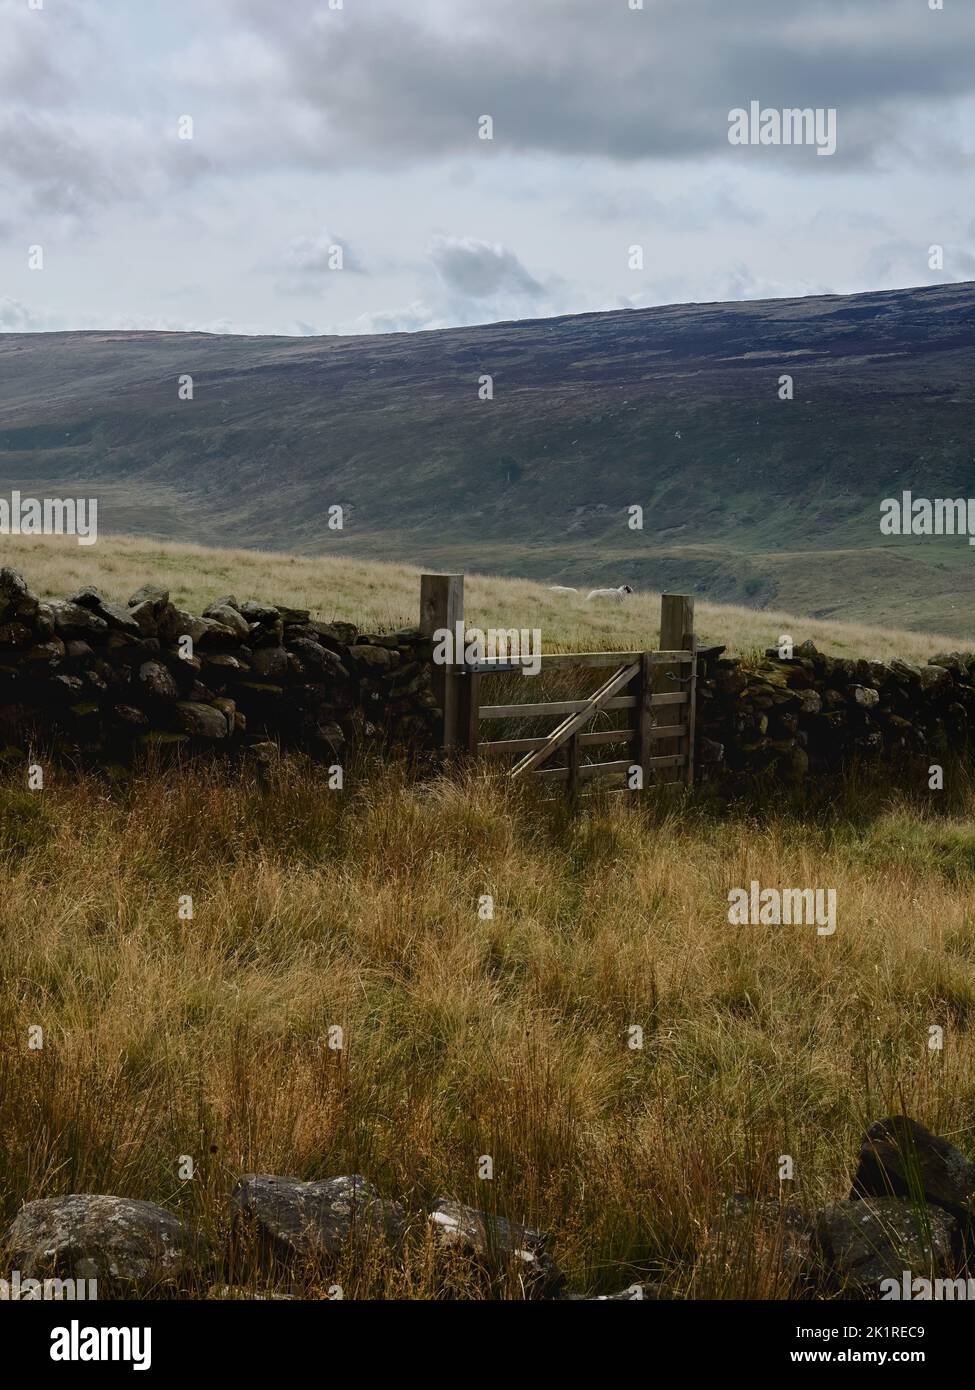 Autumn’s arrival in Yorkshire - a dry stone wall, a wood-frame gate and some quietly-grazing sheep ahead of a rugged hillside all in muted, soft light Stock Photo